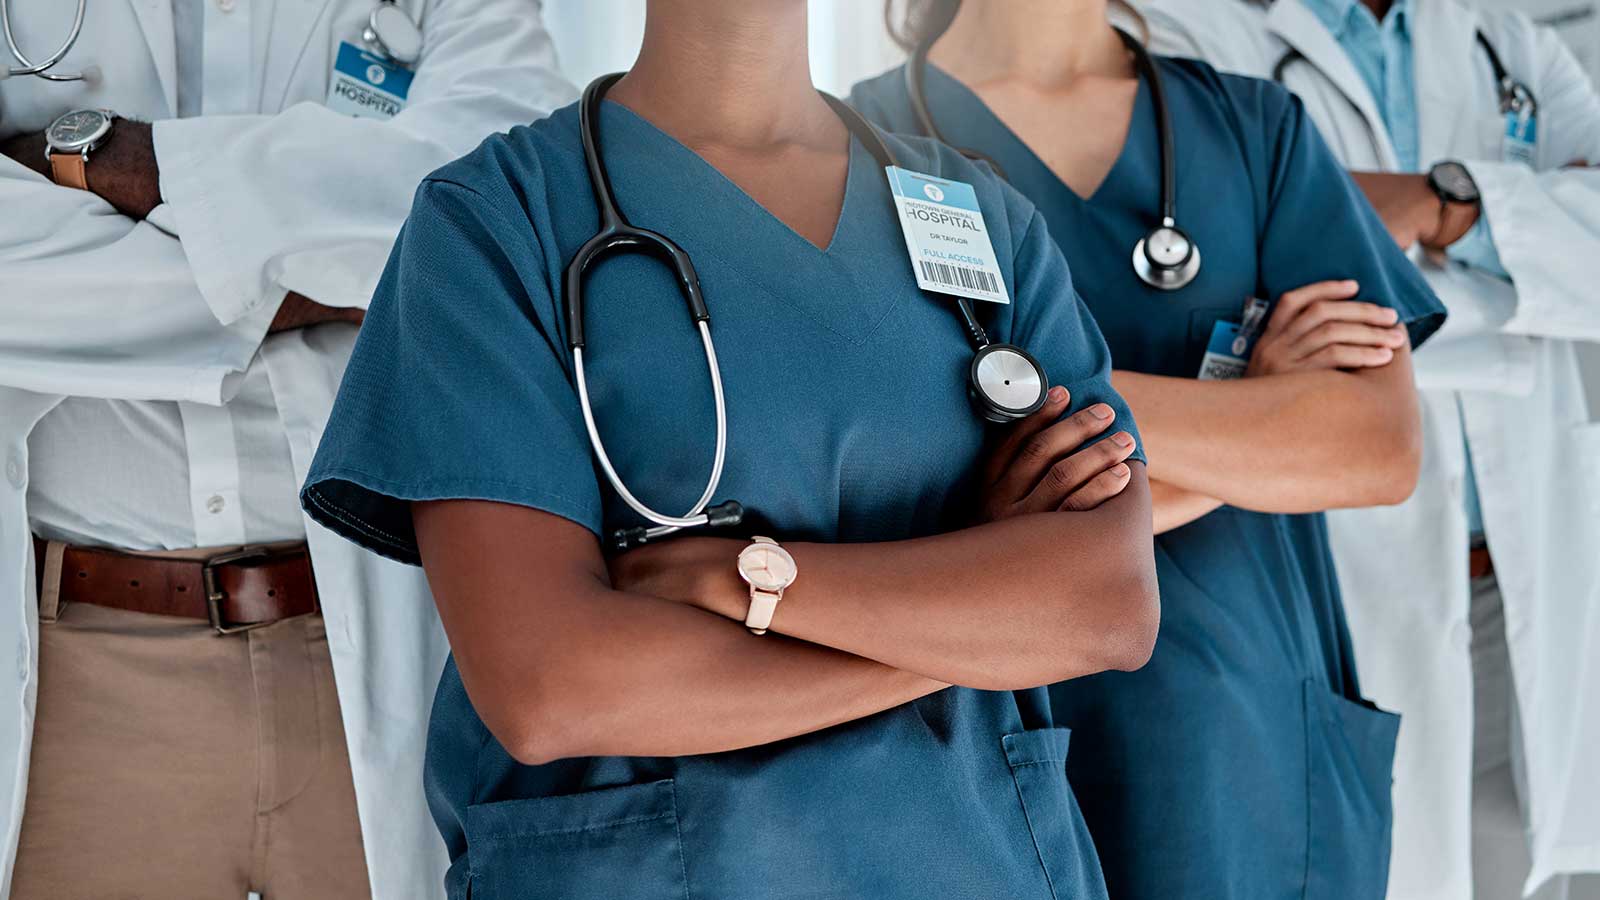 Medical professionals standing together with crossed arms